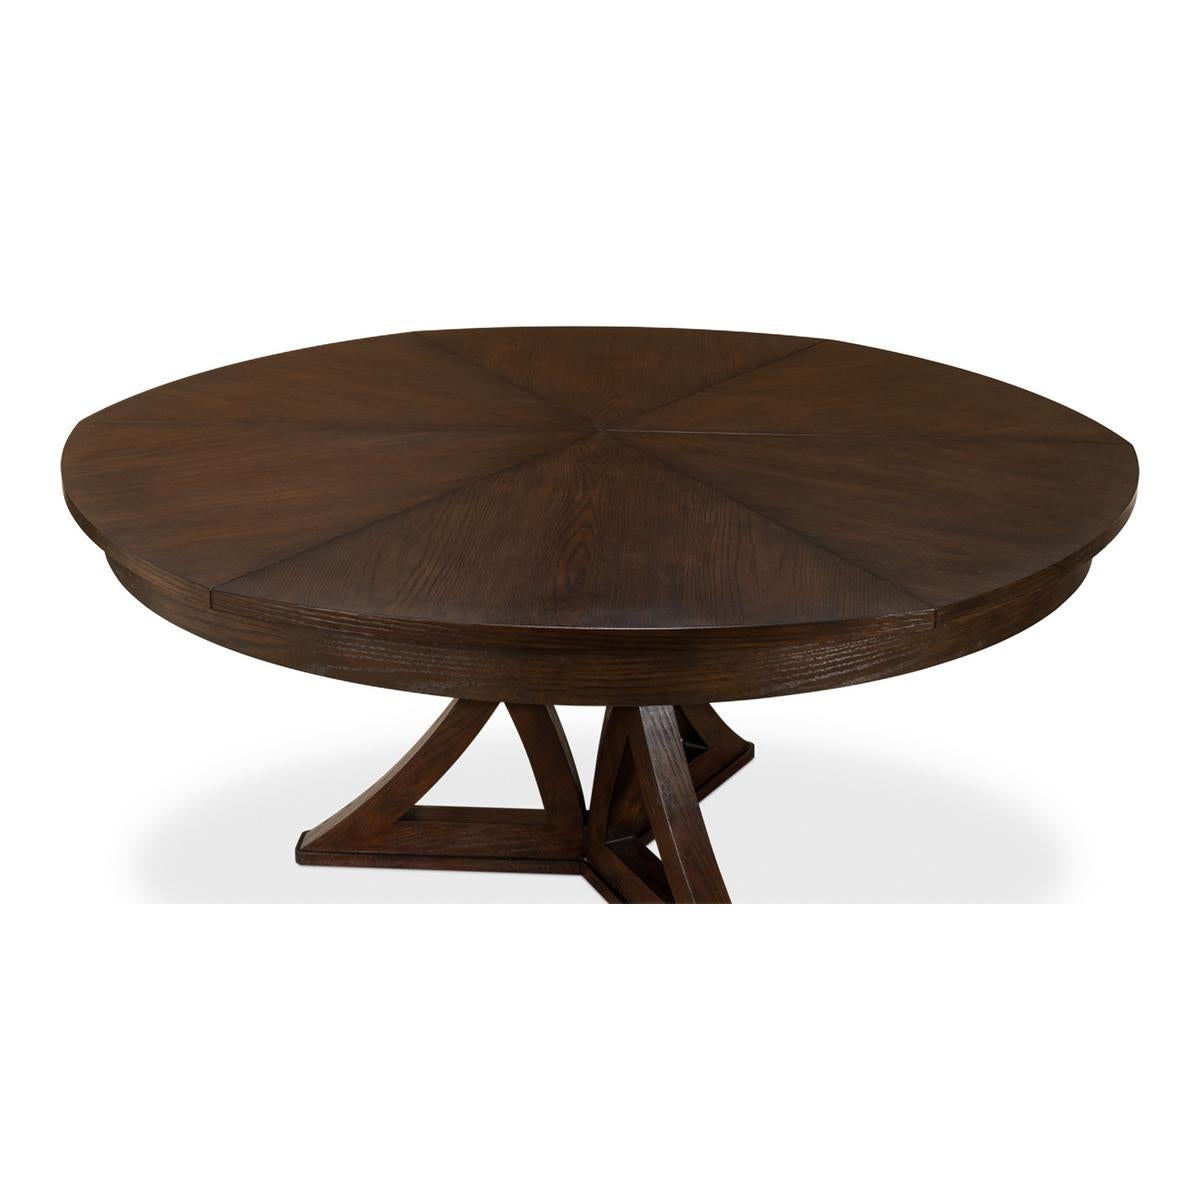 Wood Rustic Round Dining Table, Burnt Brown Oak For Sale